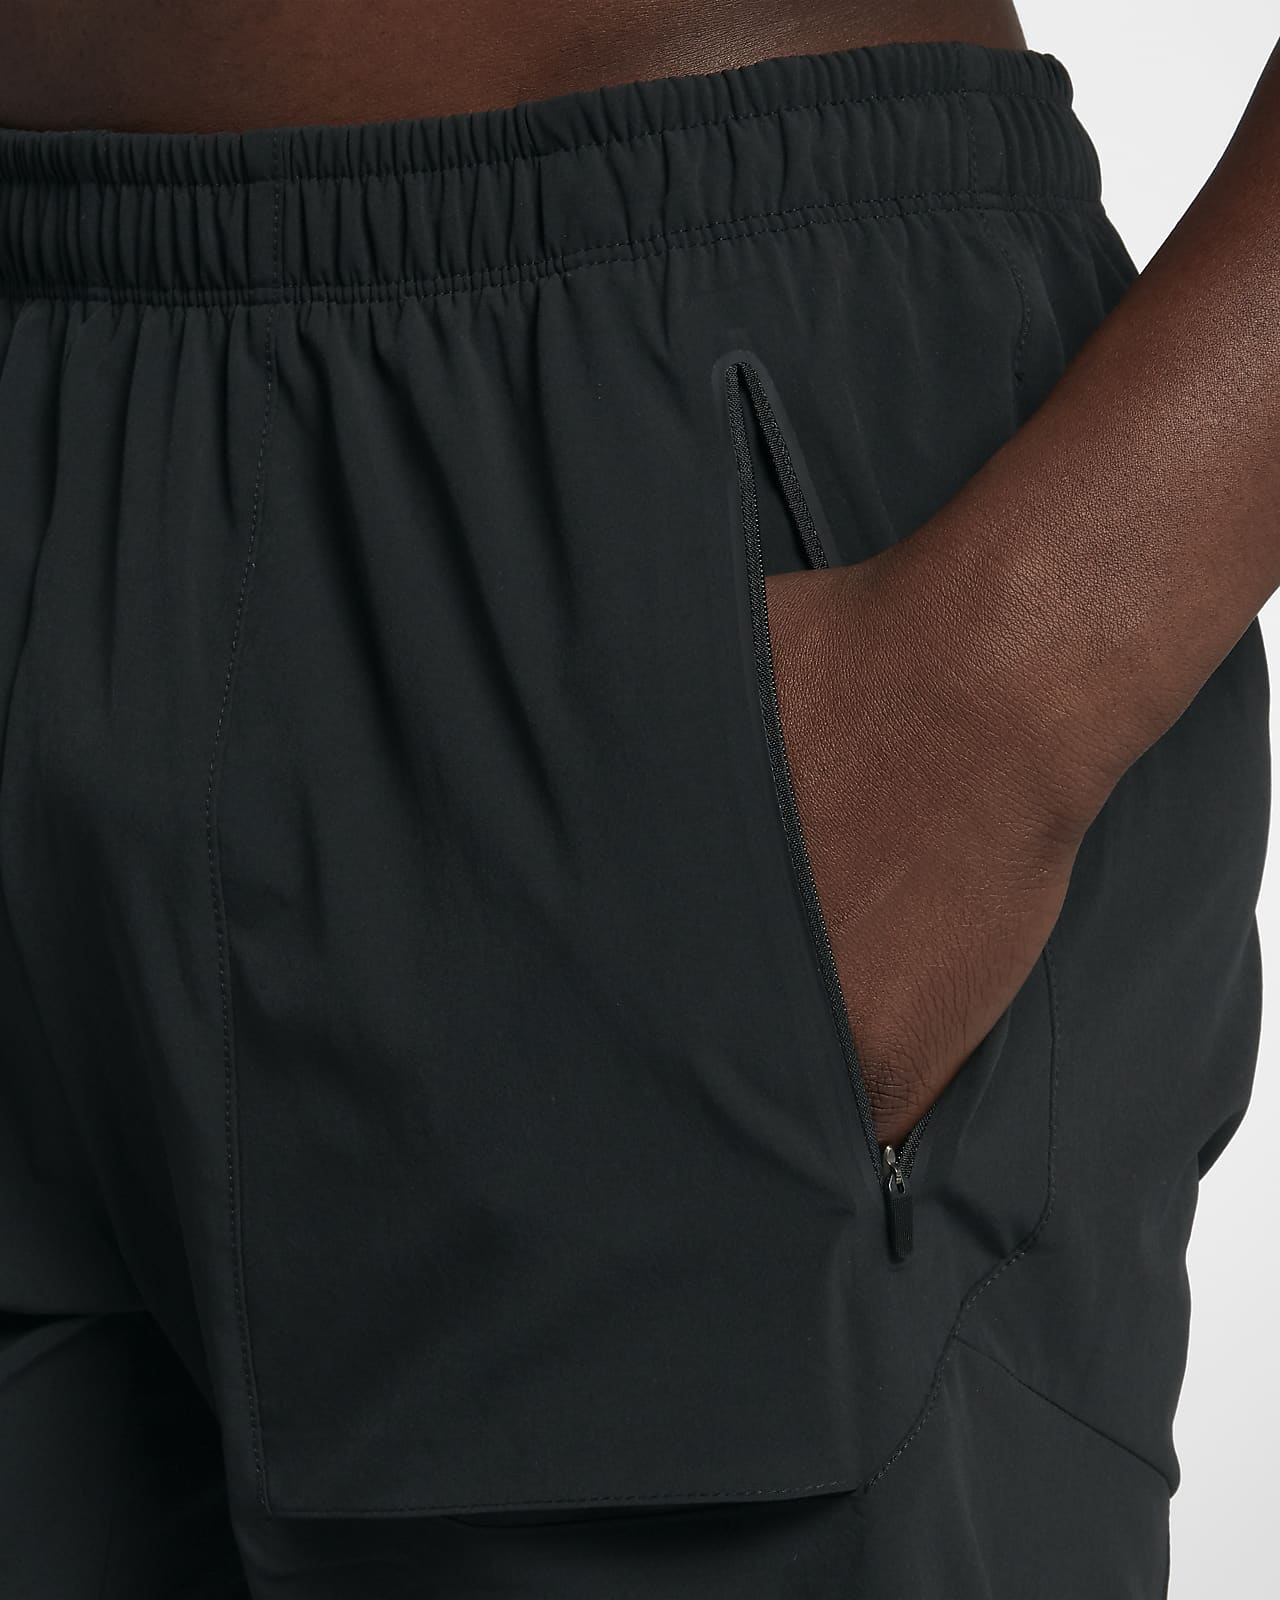 Aggregate 93+ nike running trousers best - in.cdgdbentre